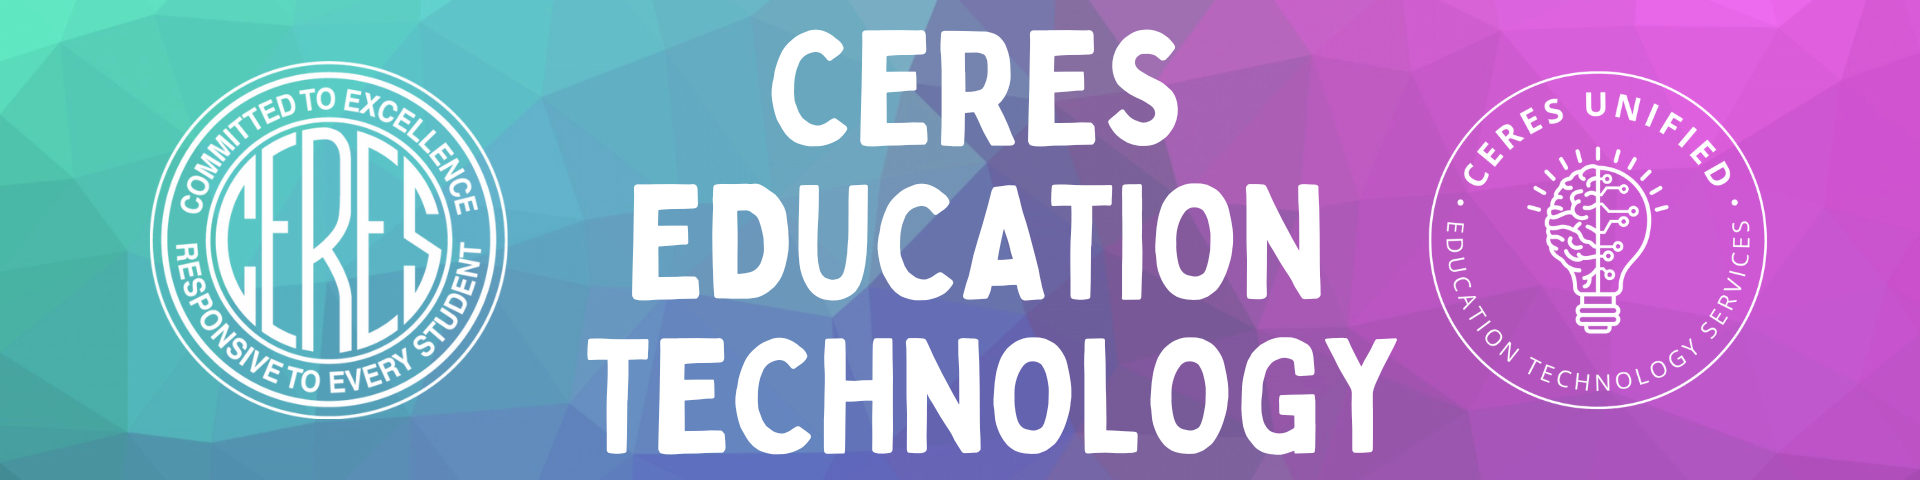 Ceres Education Technology